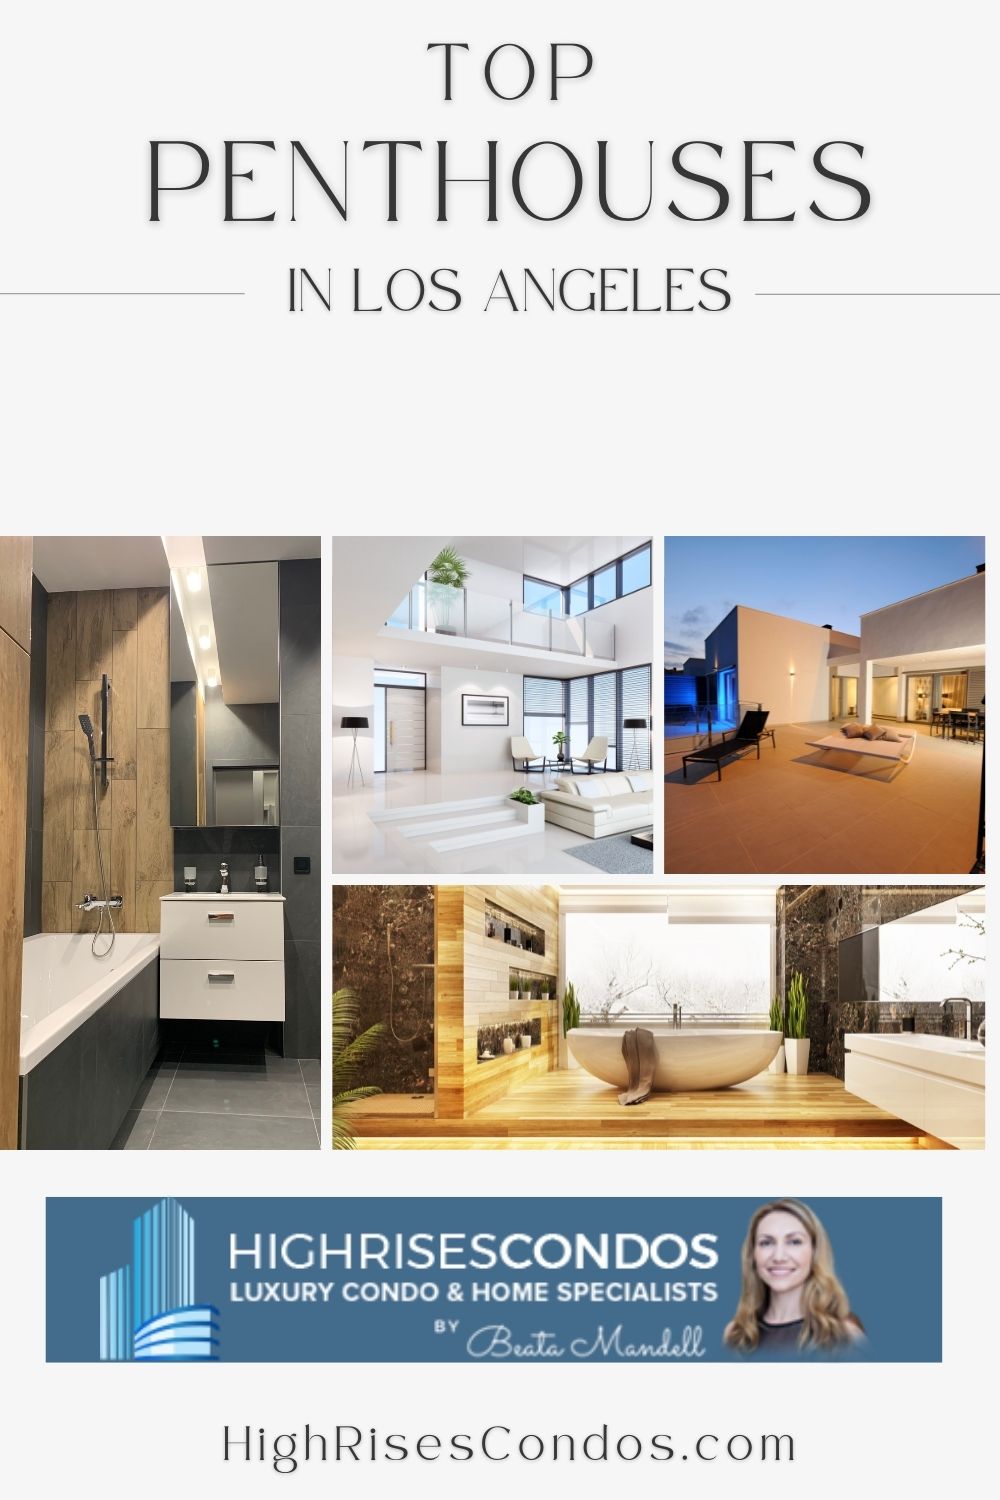 Top Penthouses in Los Angeles